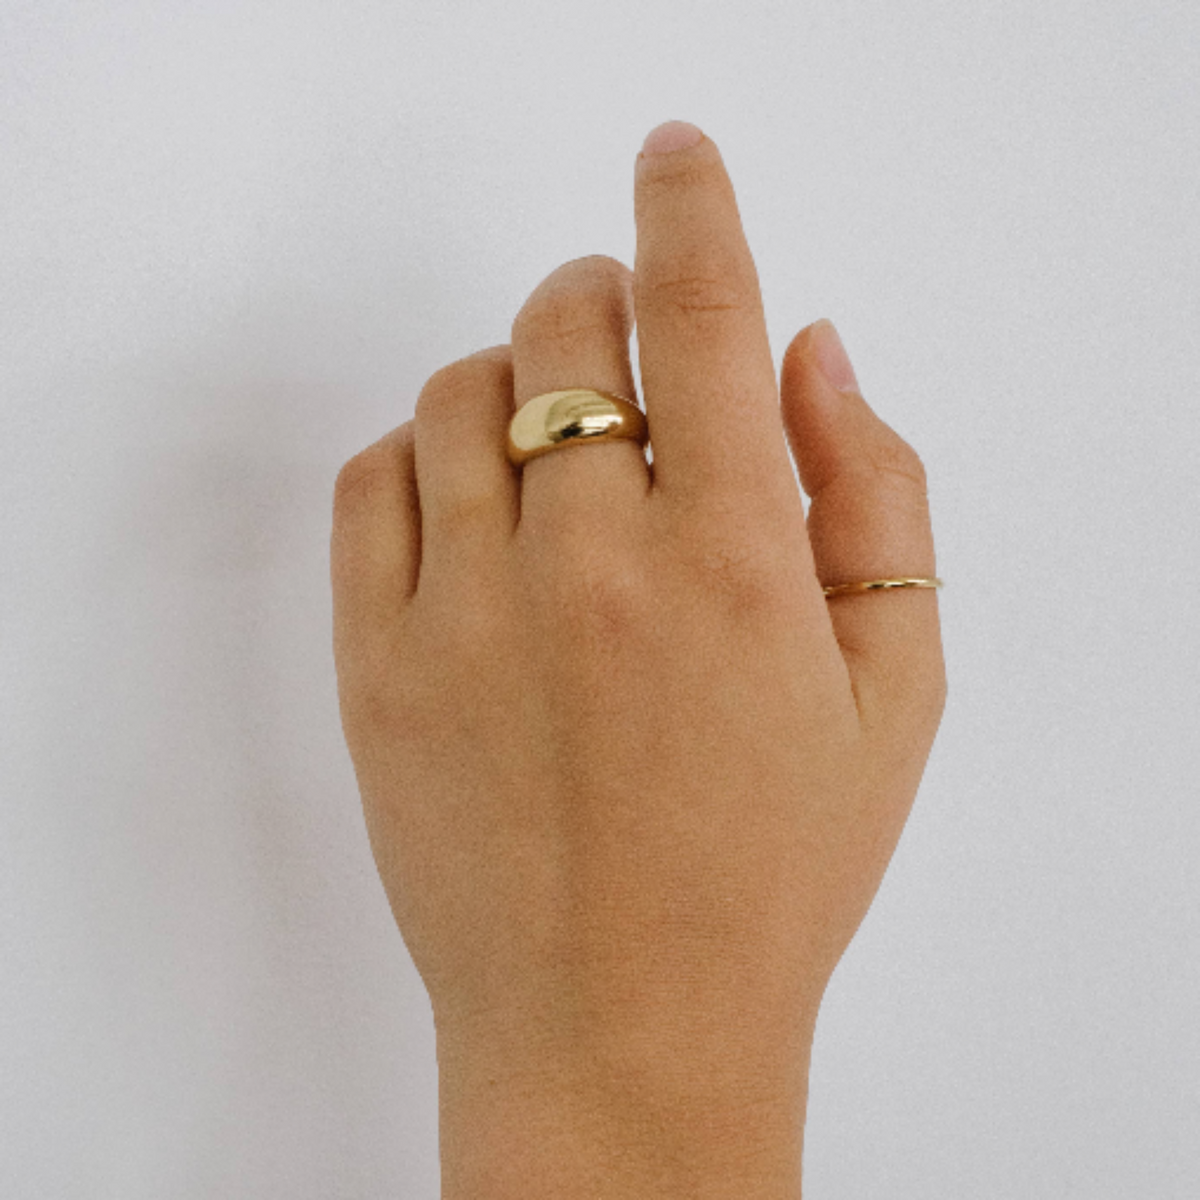 Juno 9mm Dome Ring: 6 / Gold Vermeil